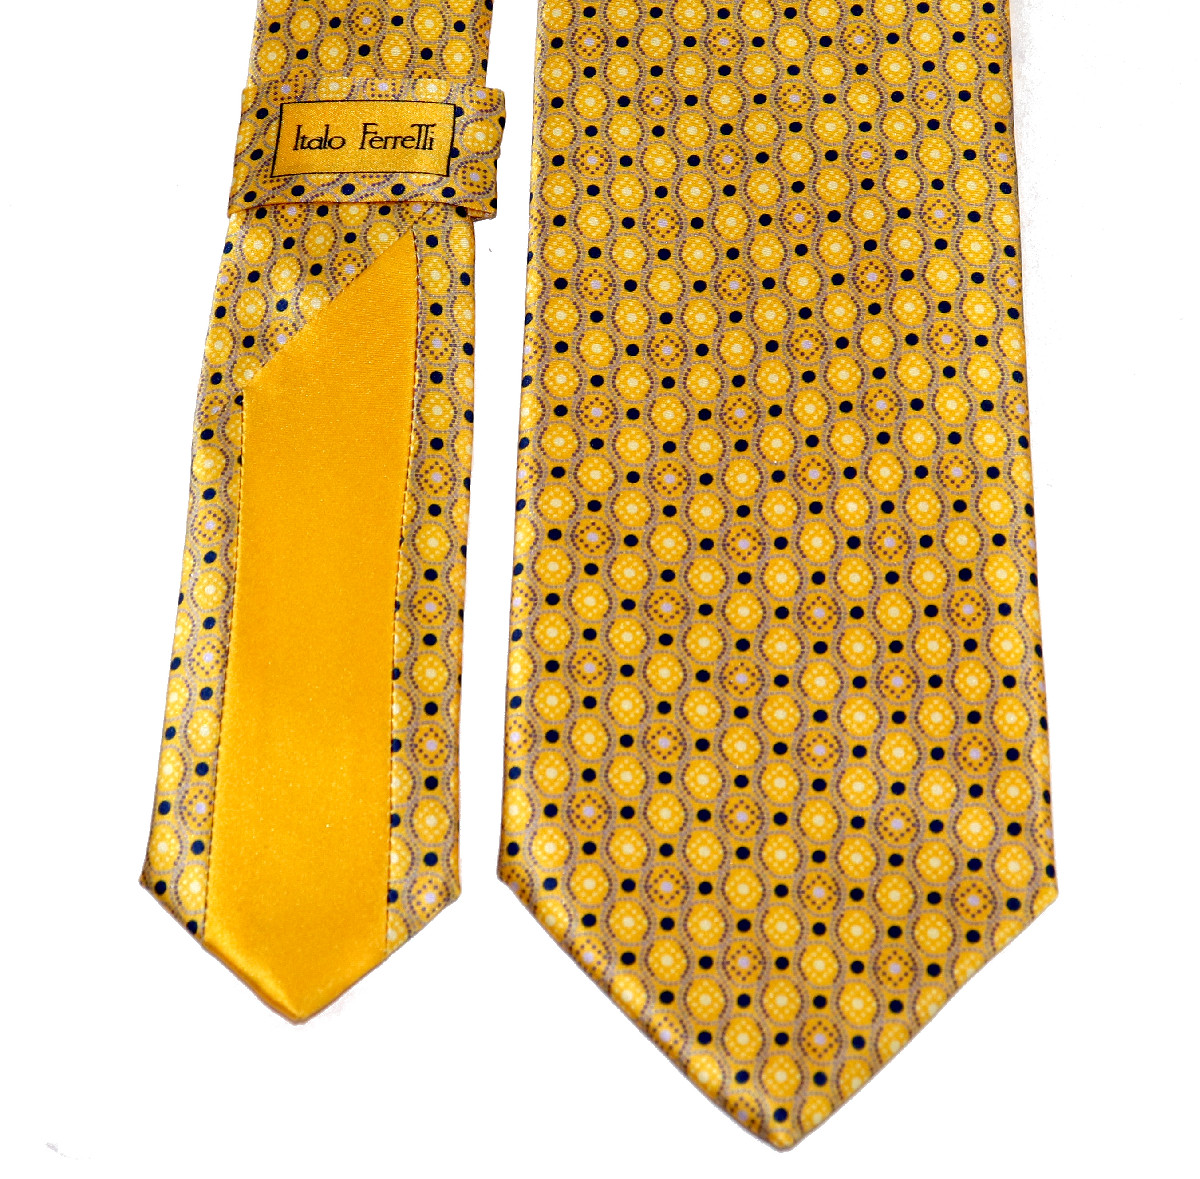 Handmade silk tie with blue and white mini polka dots and yellow ...